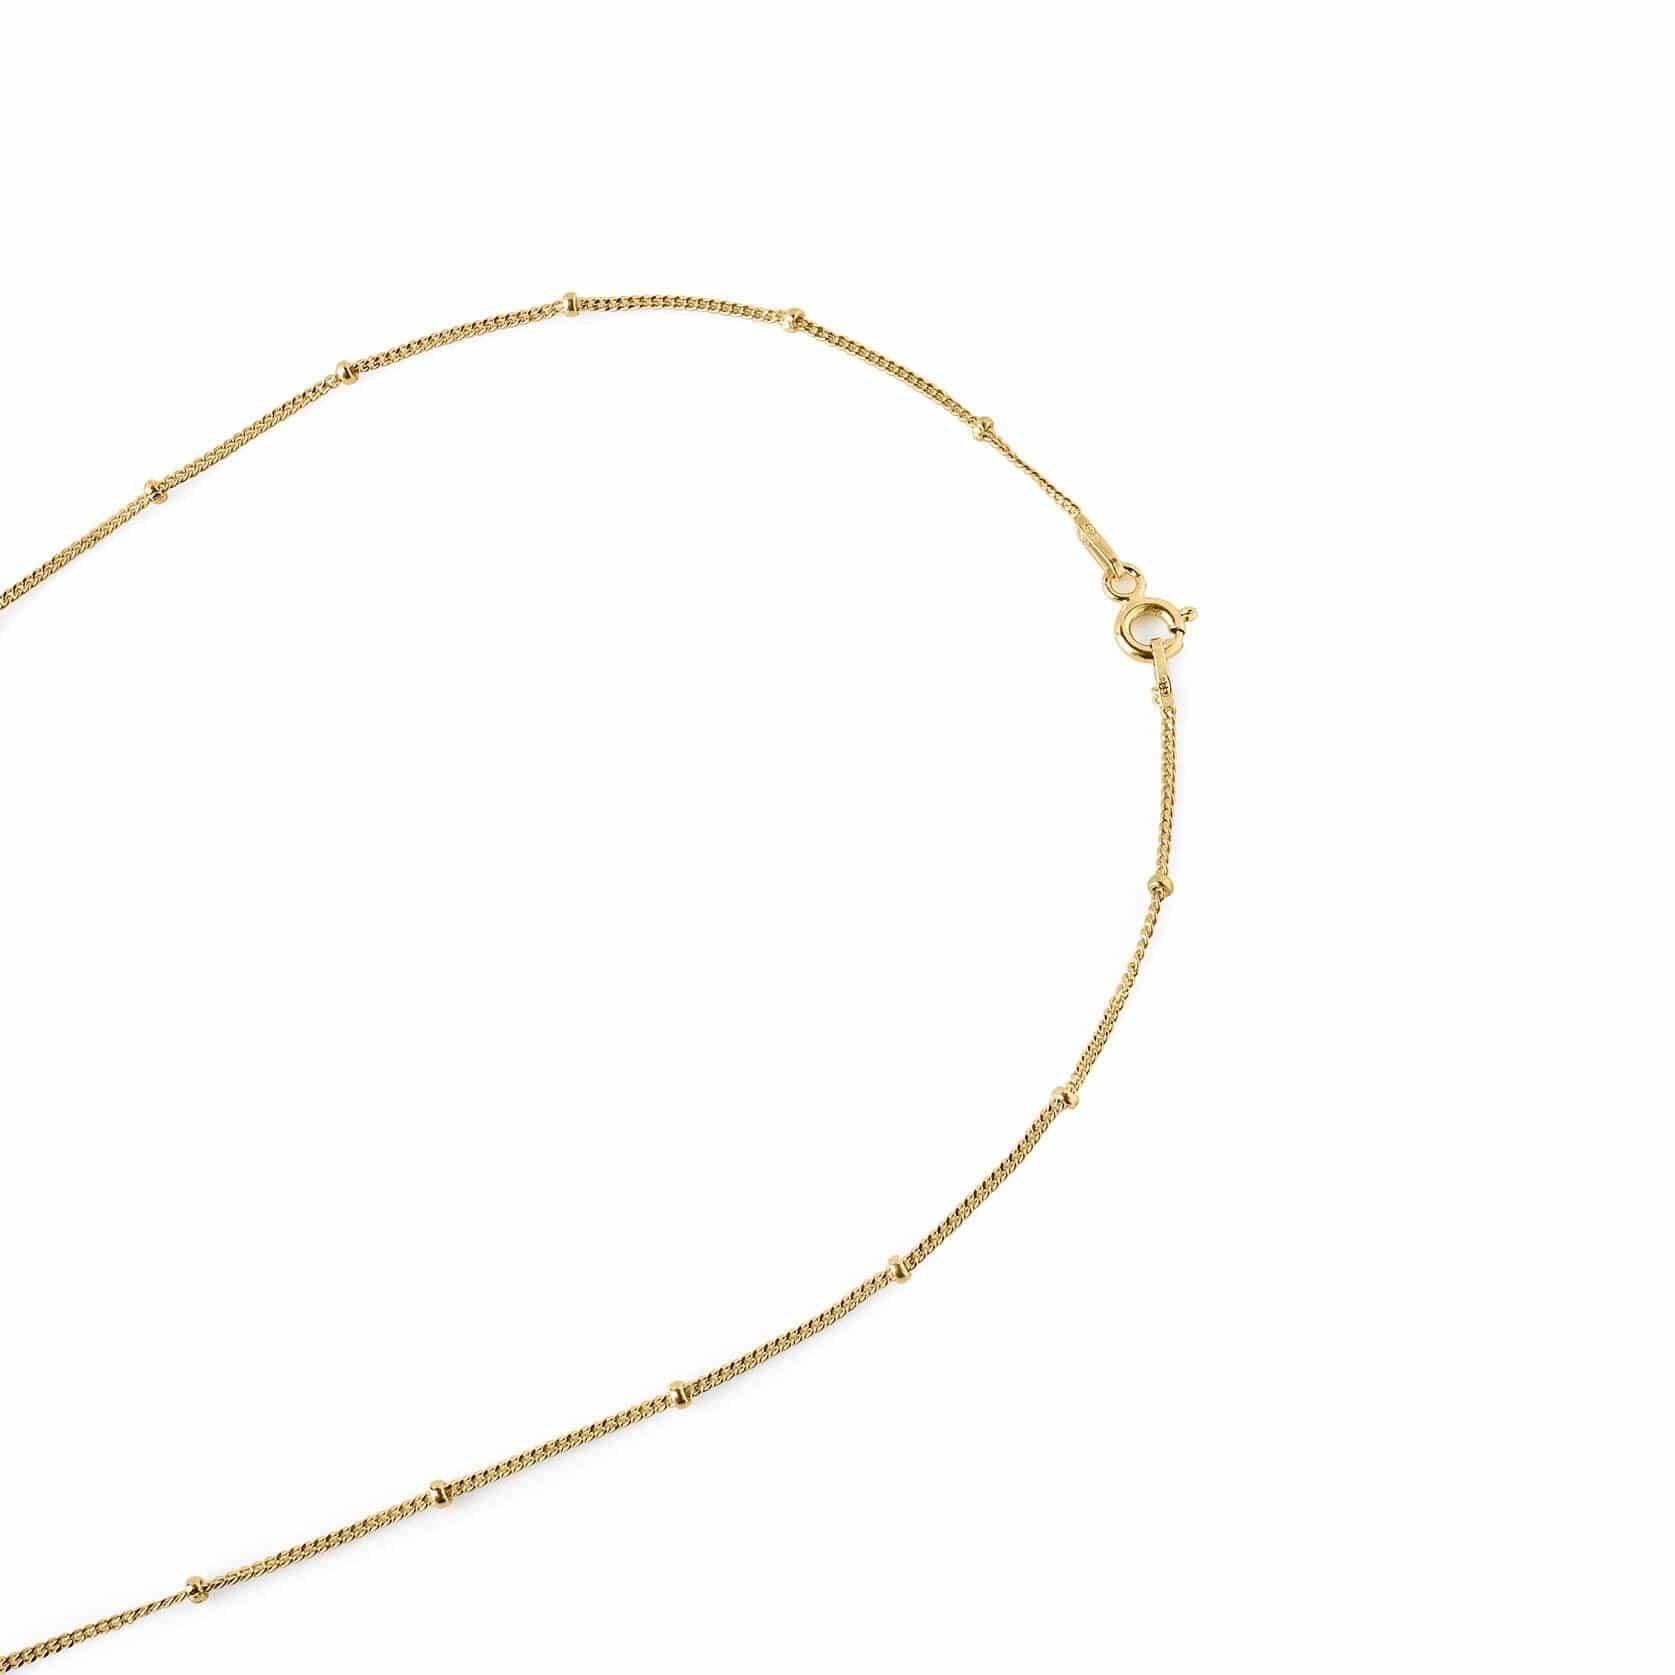 gold plated necklace with round